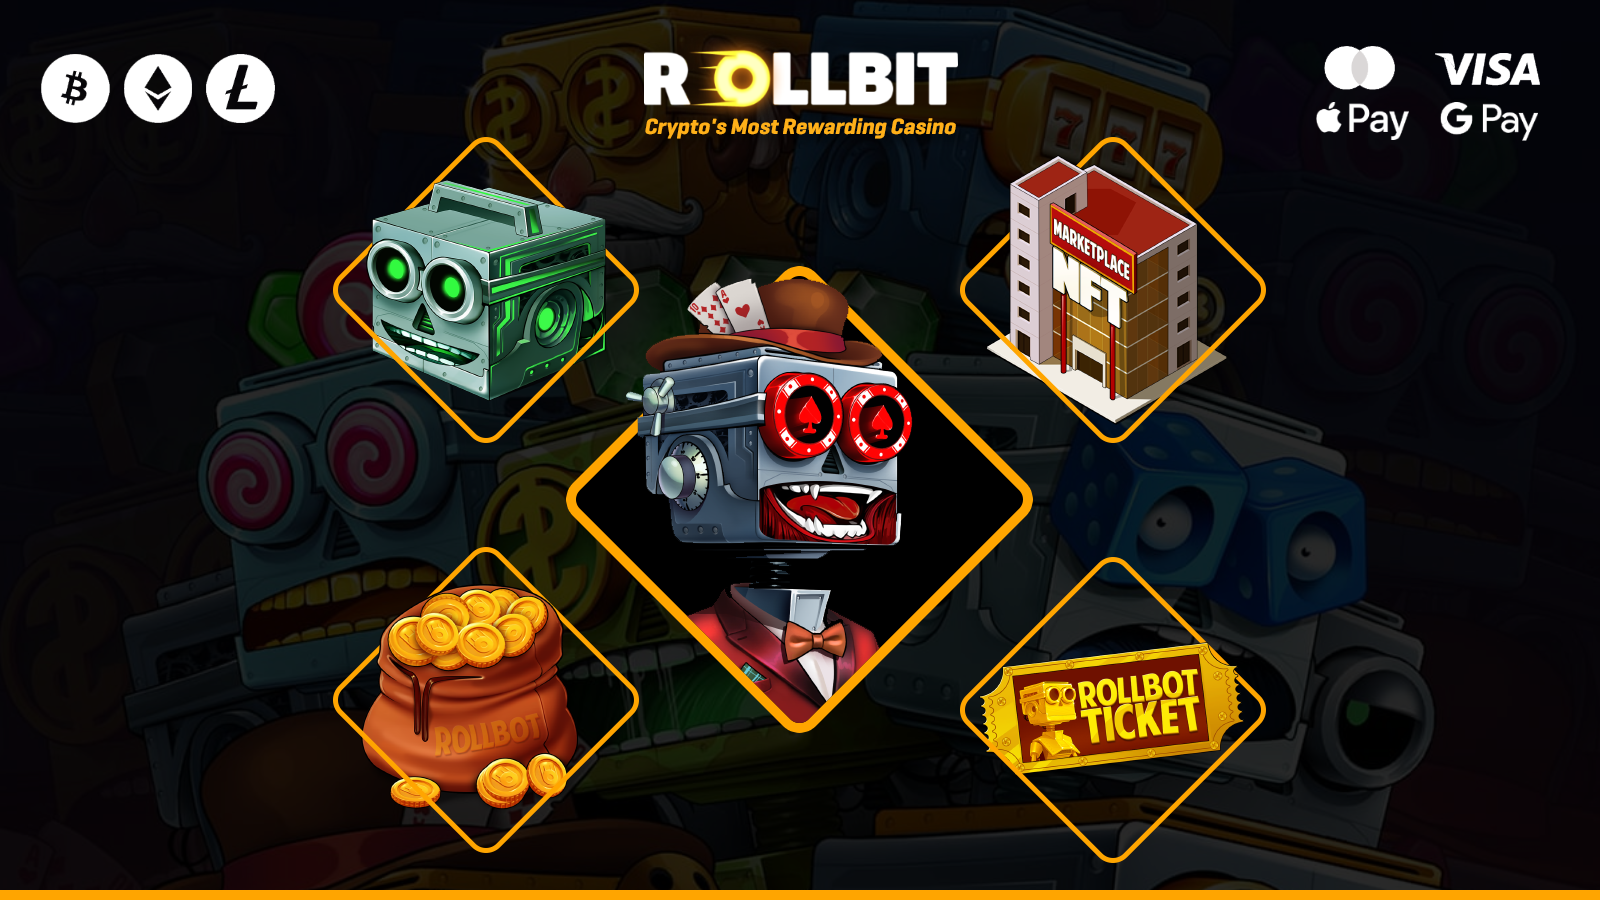 Everything You Need to Know About Rollbots